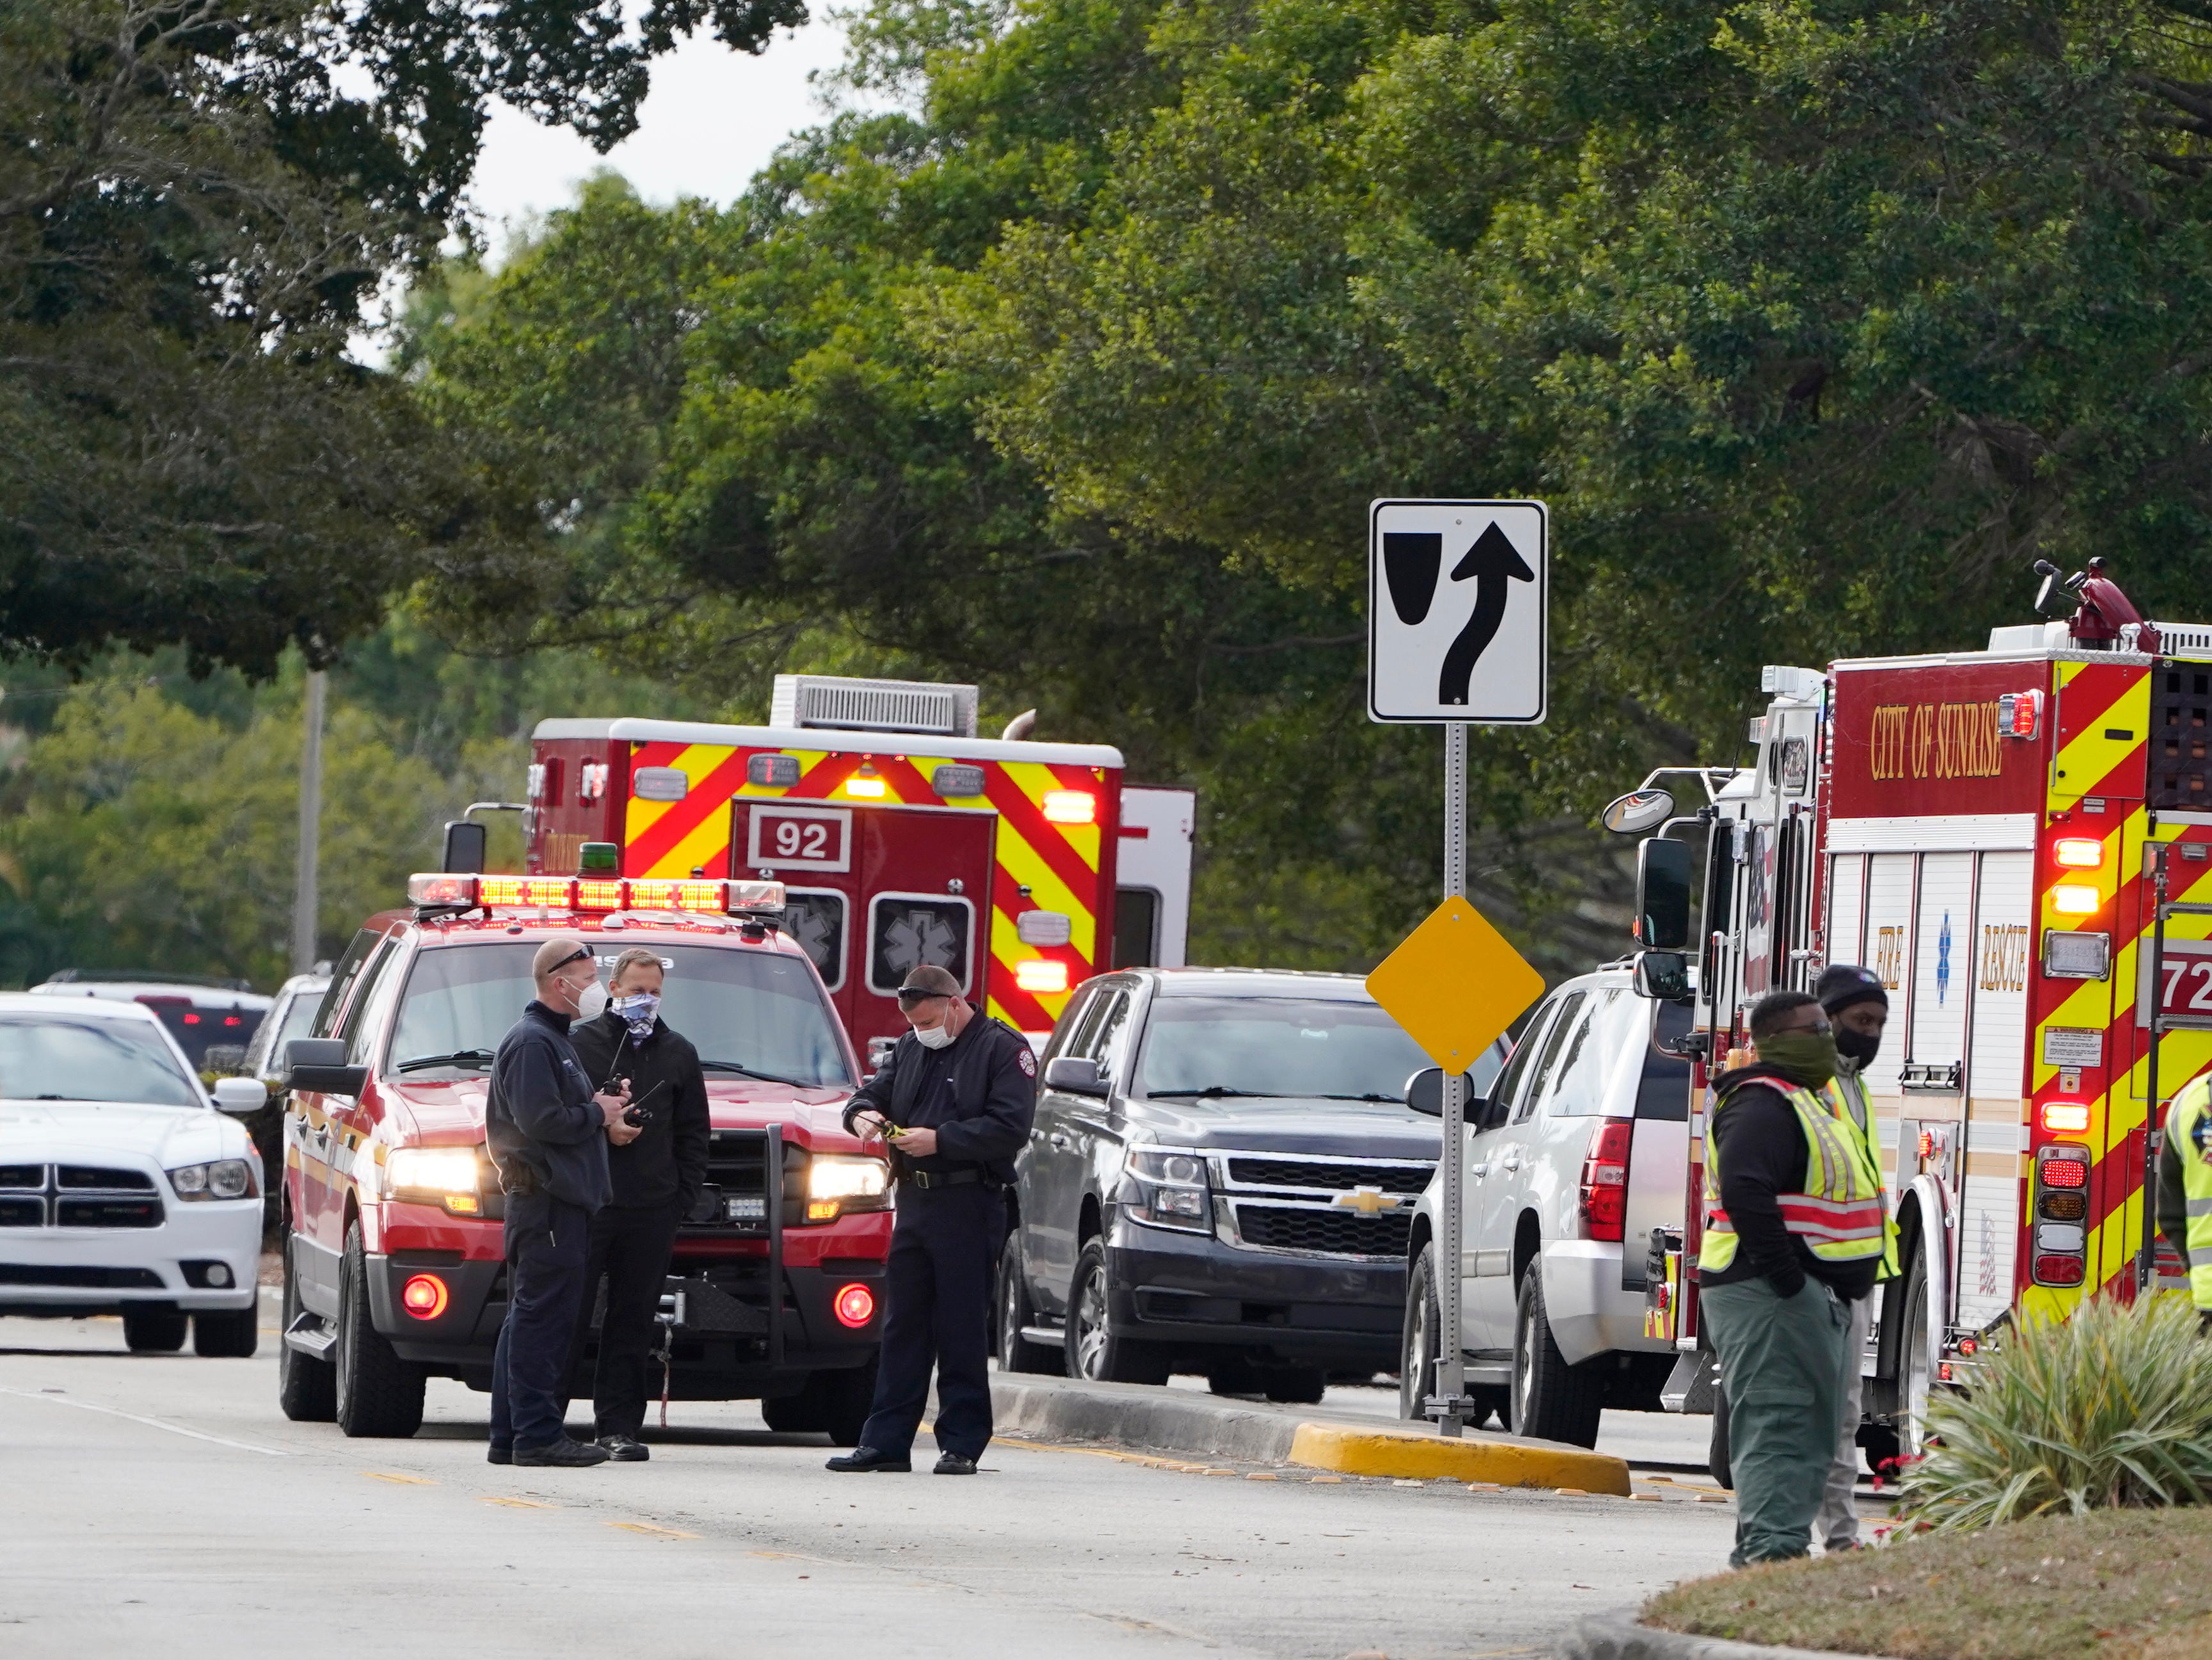 Law enforcement officers block an area where a shooting wounded several FBI while serving an arrest warrant in Sunrise, Florida on 2 February, 2021